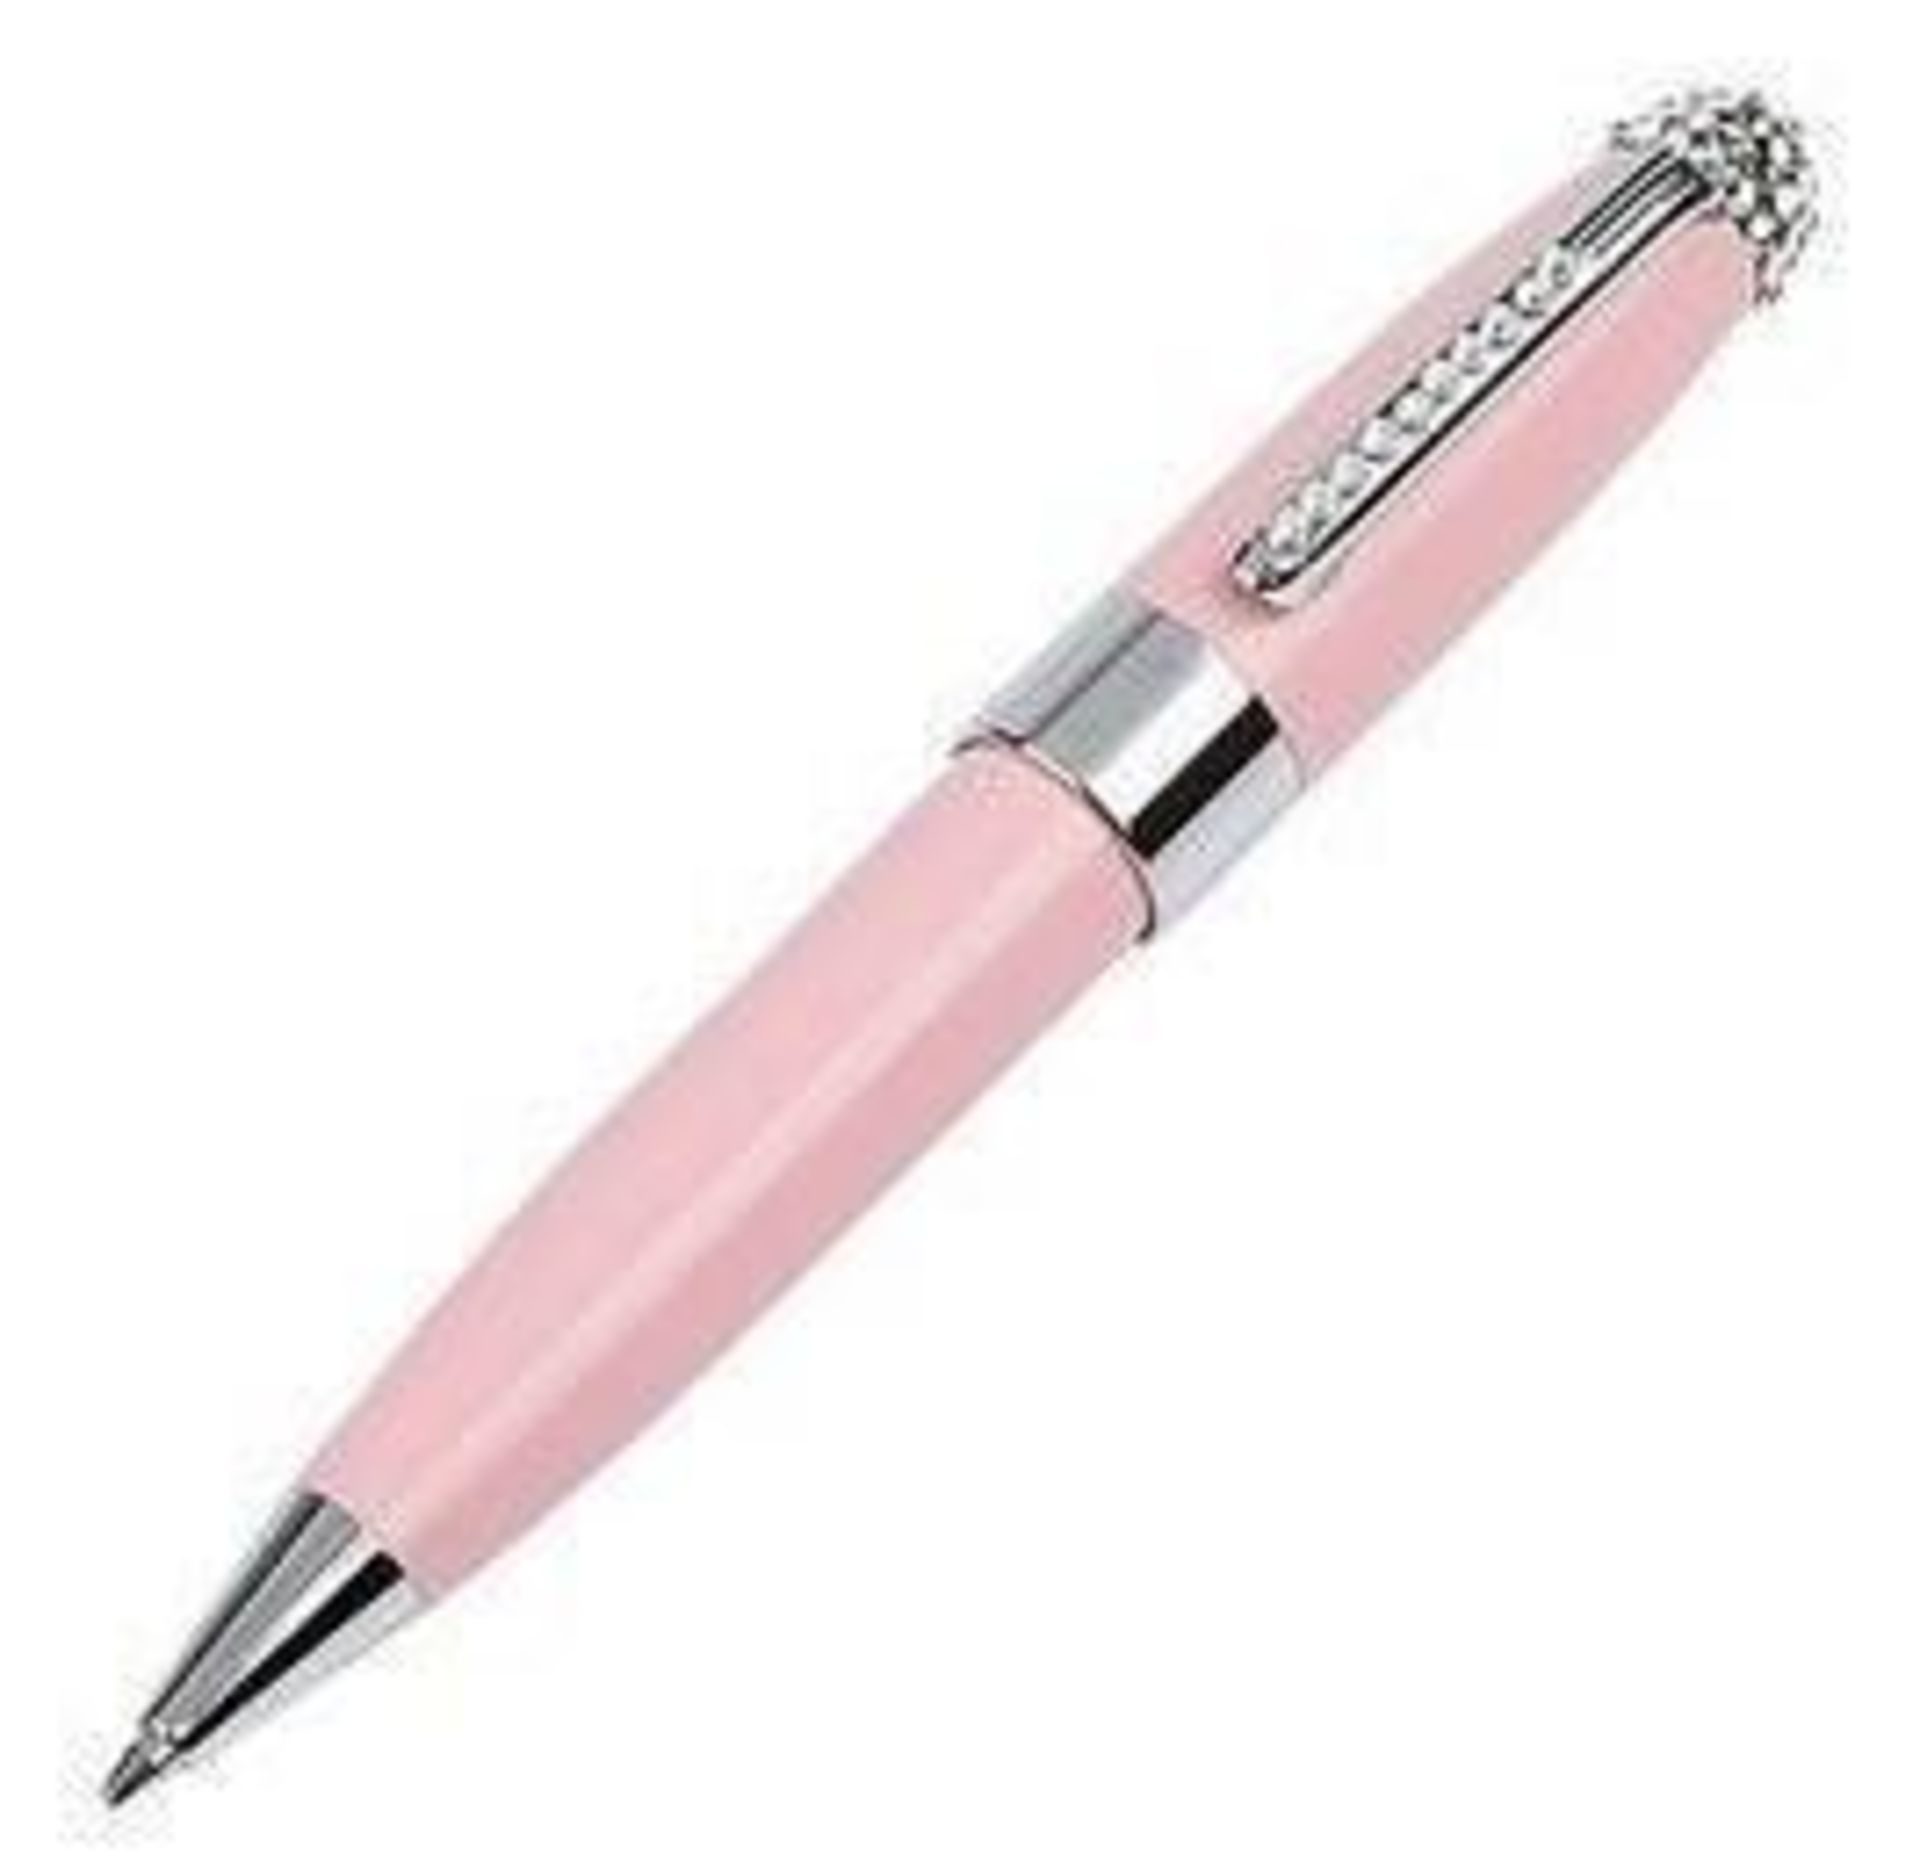 10 x ICE LONDON "Duchess" Ladies Pens - All Embellished With SWAROVSKI Crystals - Colour: Light Pink